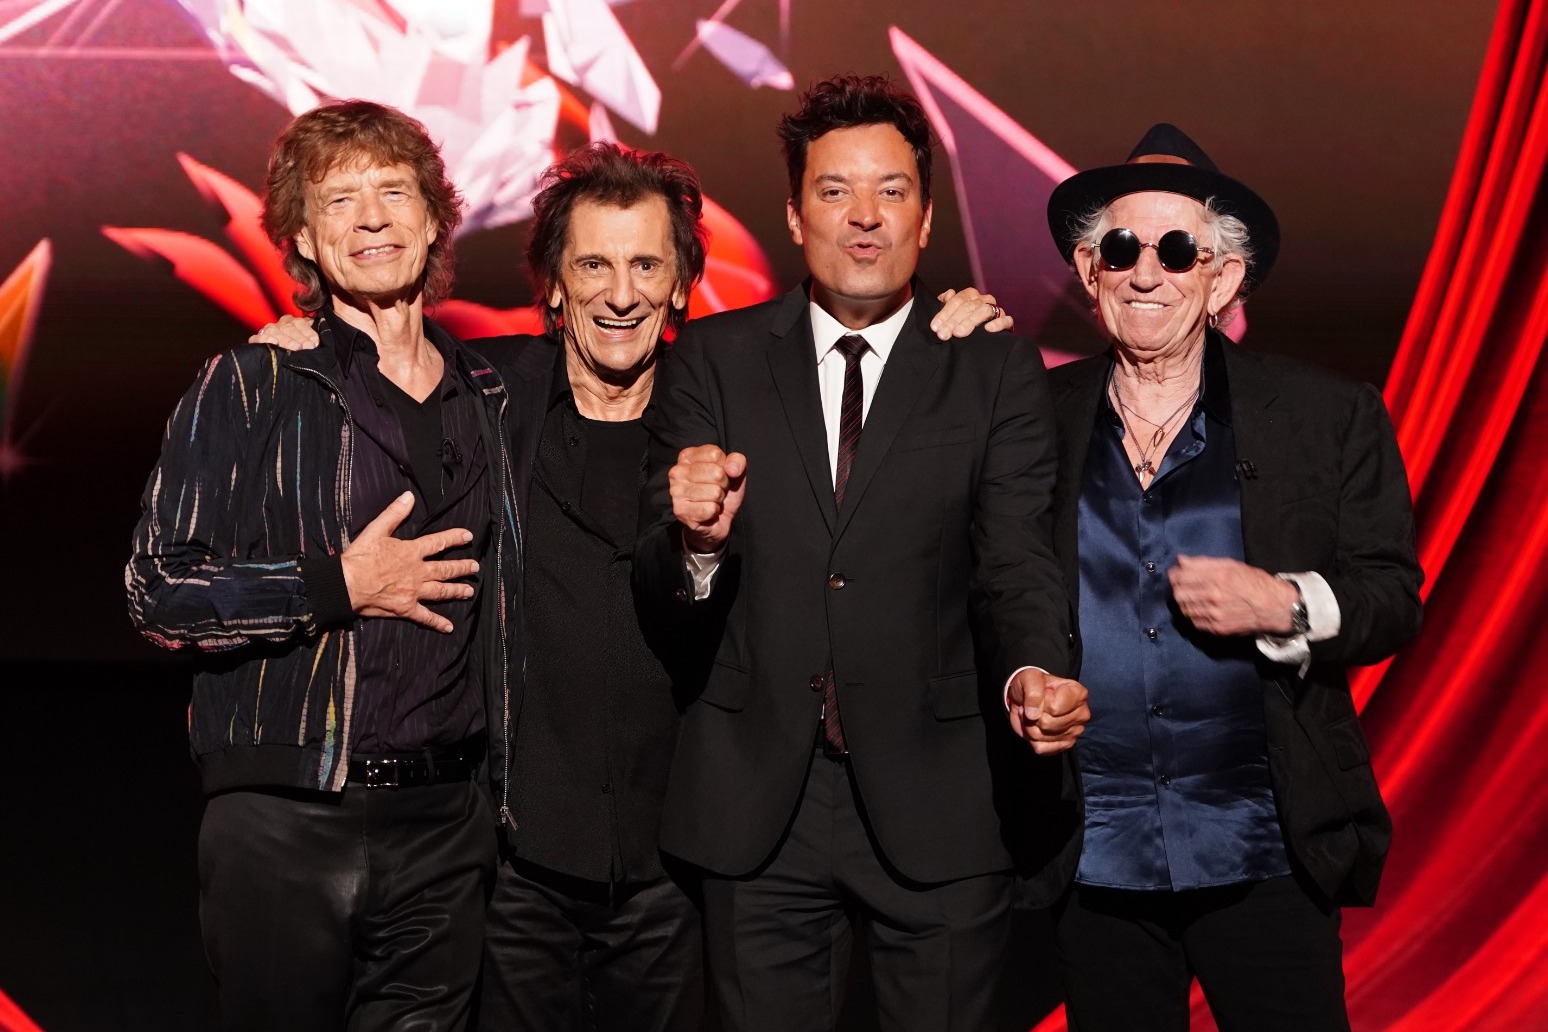 Sir Mick Jagger on encouraging bandmates to produce Rolling Stones’ new album 